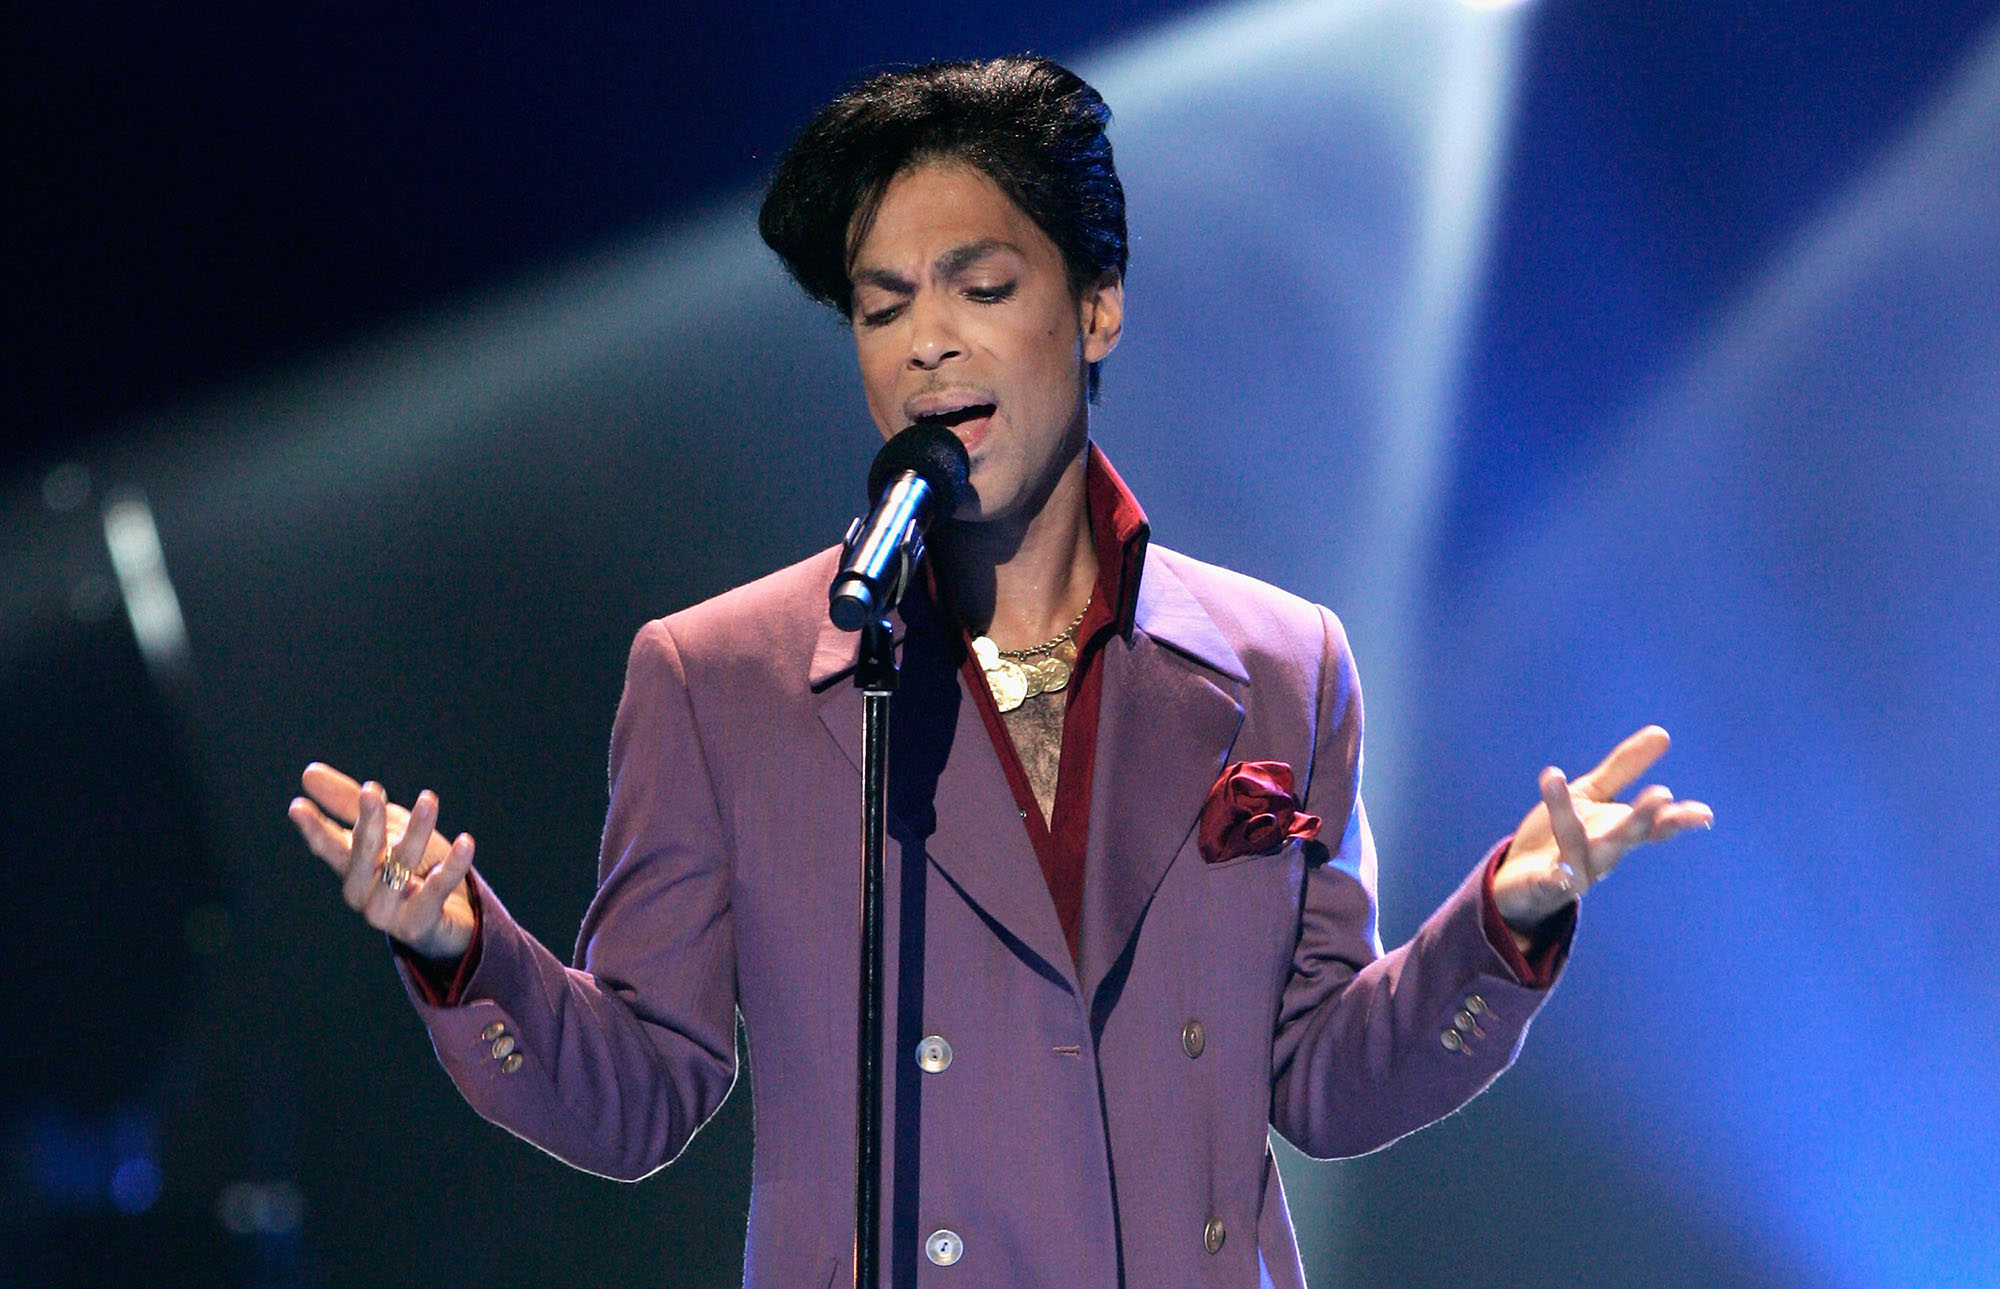 Prince performs onstage during the American Idol Season 5 Finale on May 24, 2006 at the Kodak Theatre in Hollywood, California.  (Photo by Vince Bucci/Getty Images) (Vince Bucci&mdash;Getty Images)